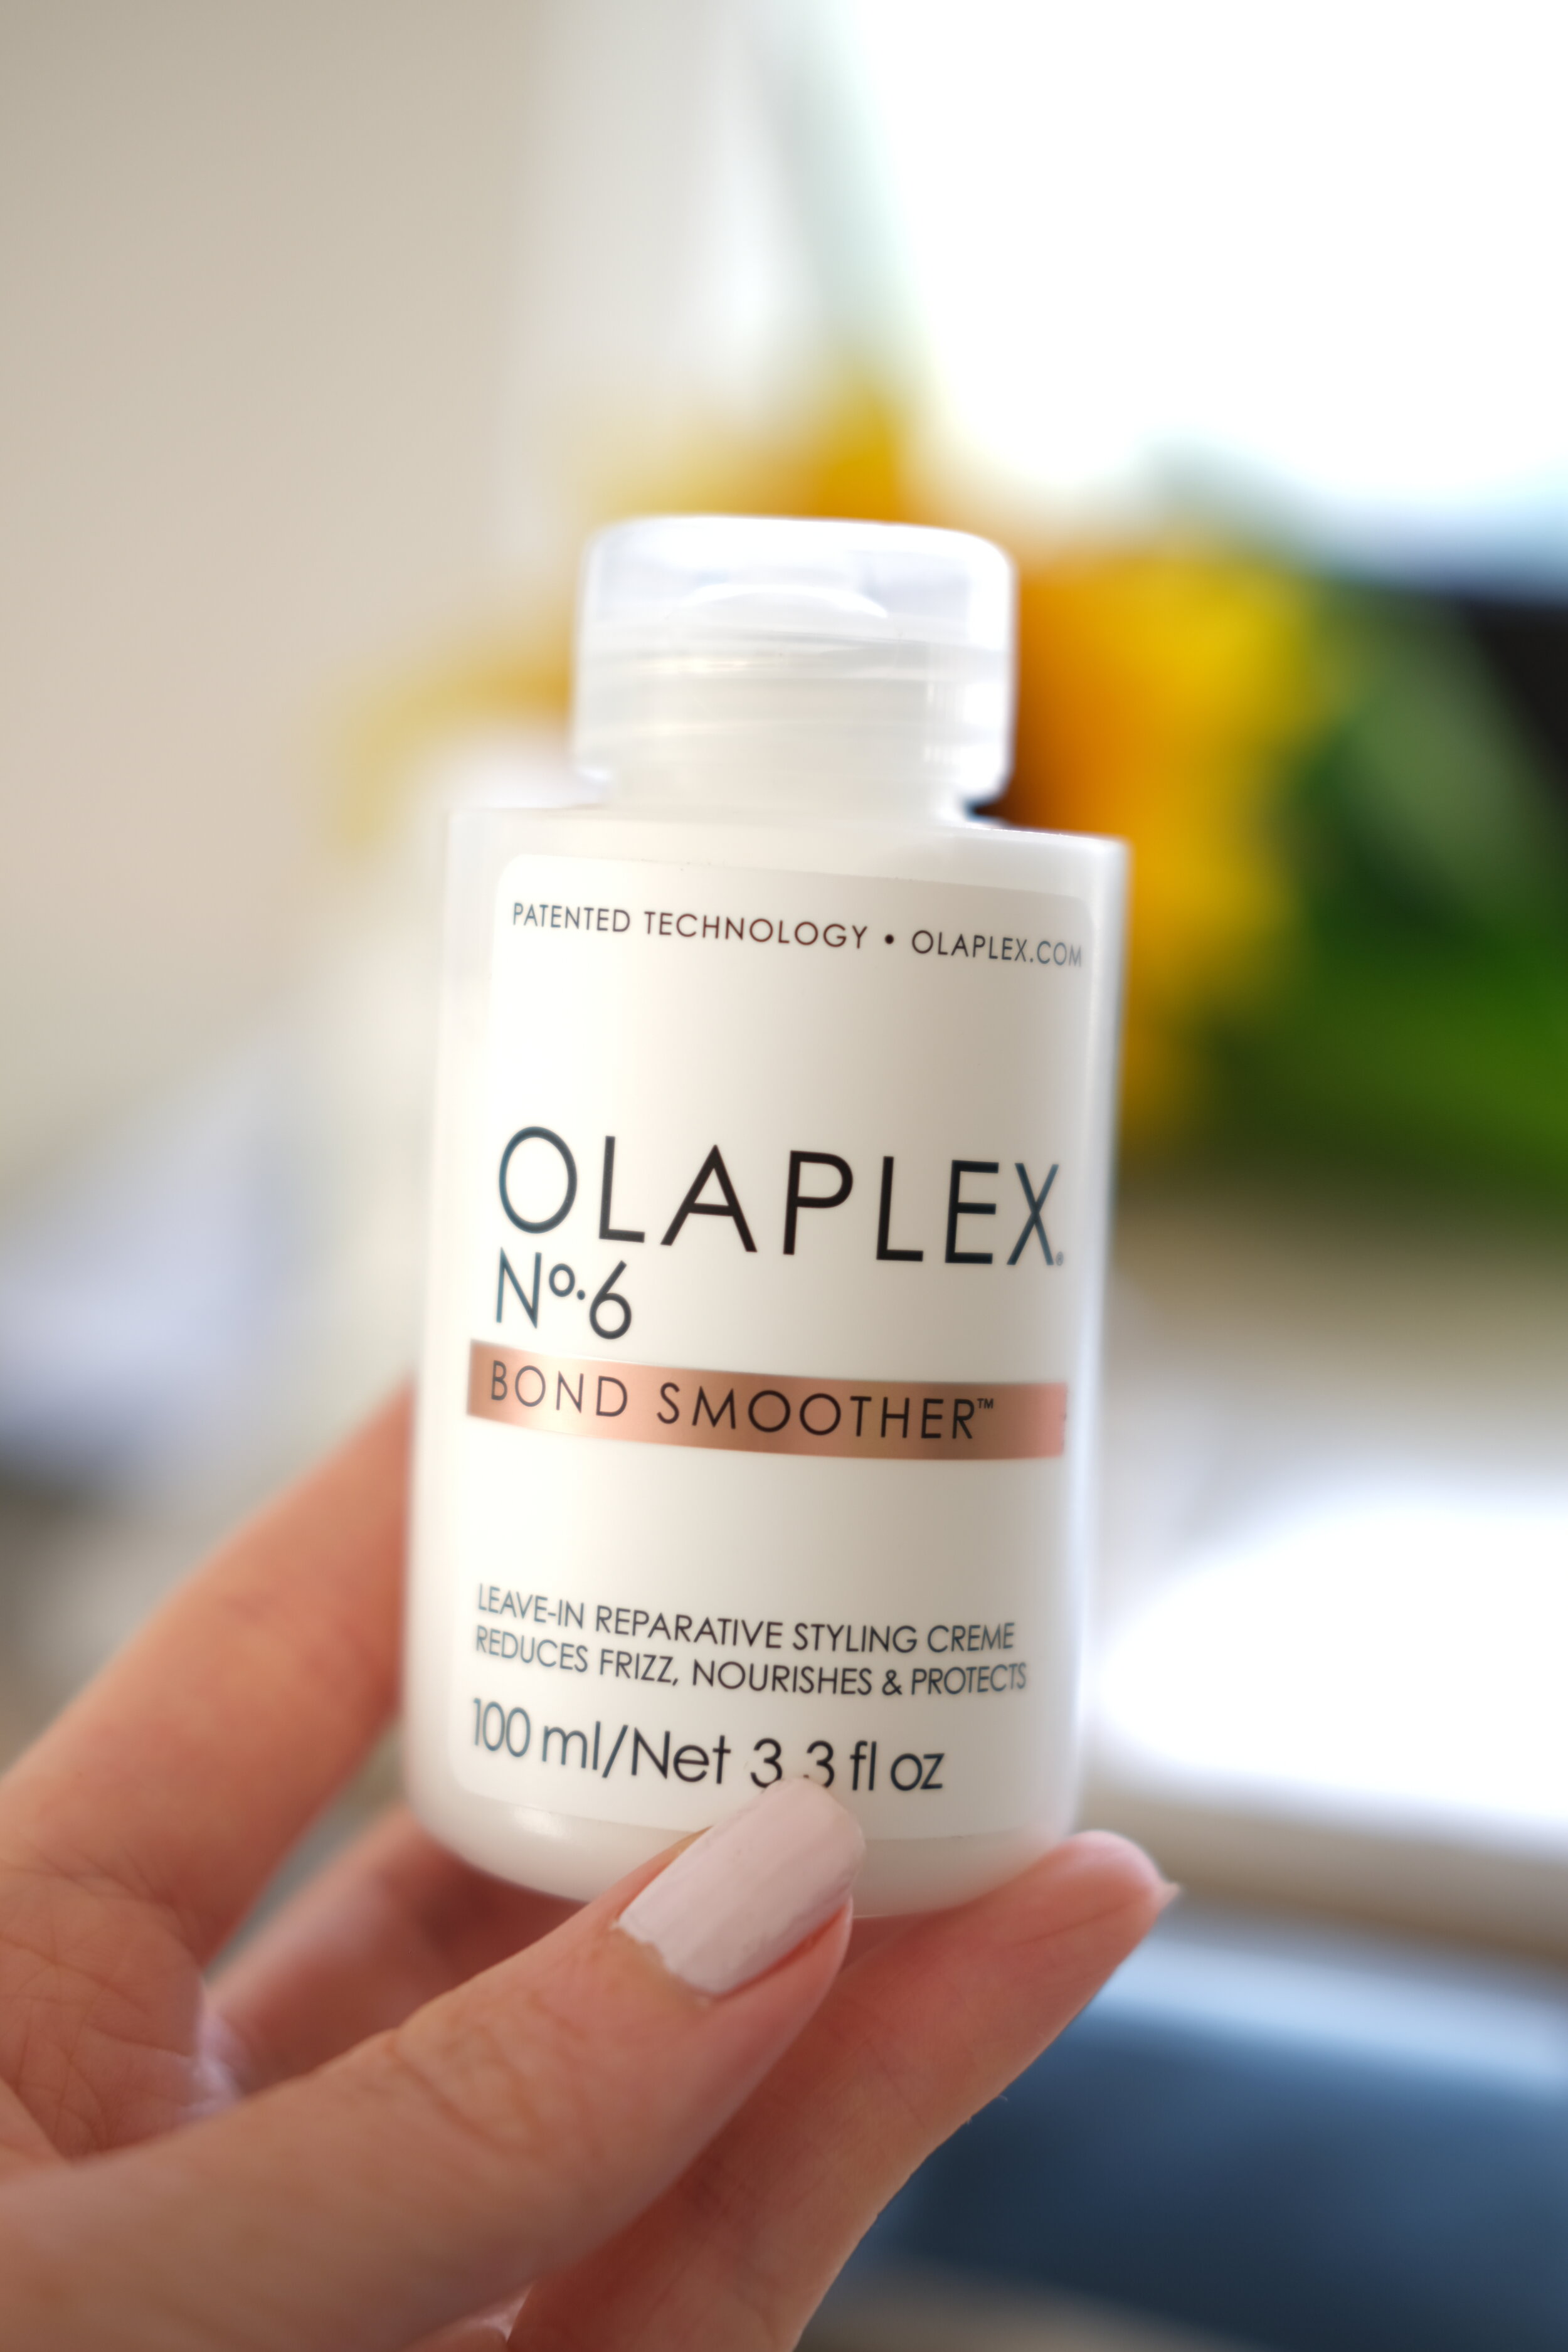 I will talk through the difference between Olaplex 6 and 8 to help you decide whether Olaplex 6 or 8 is for you. After reading this, you will know exactly which Olaplex to use!